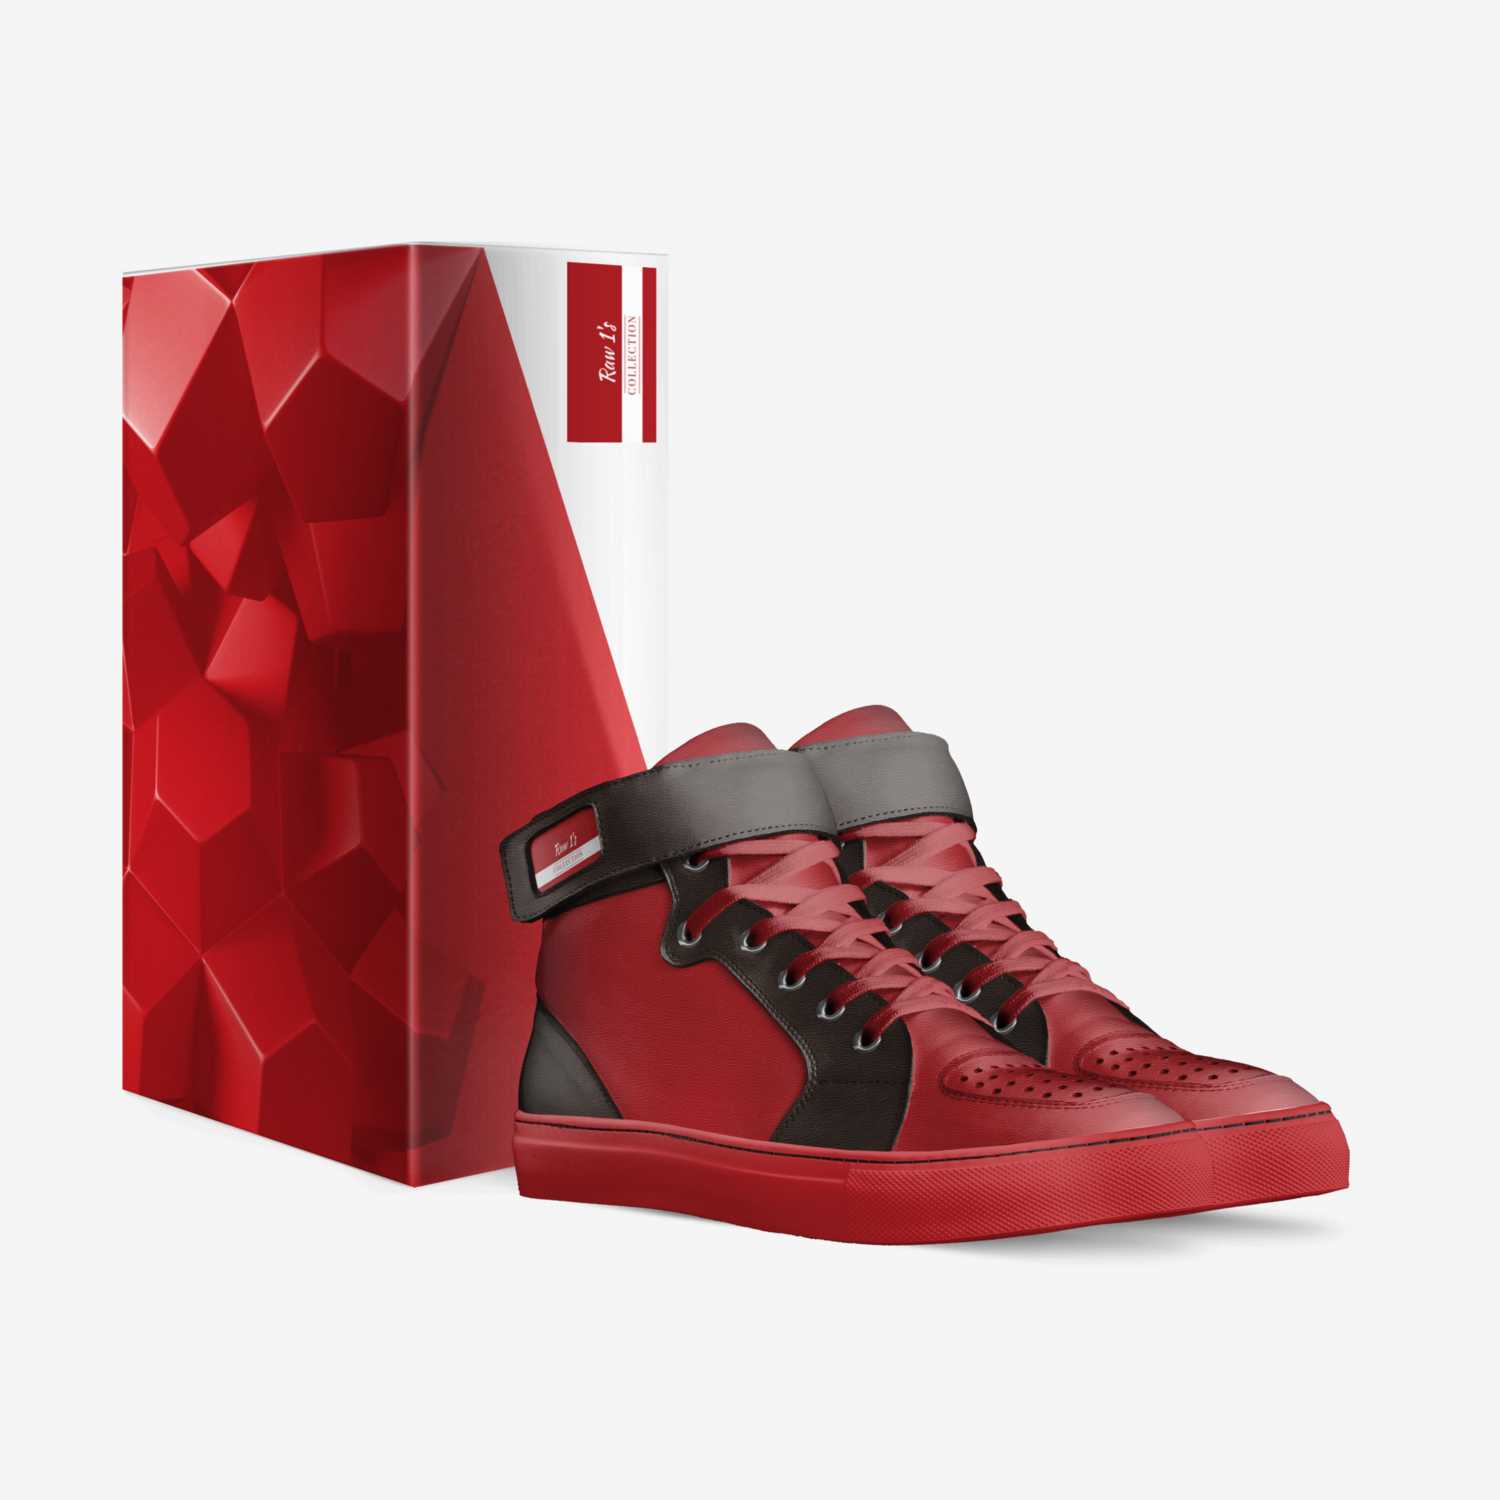 Raw 1's custom made in Italy shoes by Kaide Rawlins | Box view